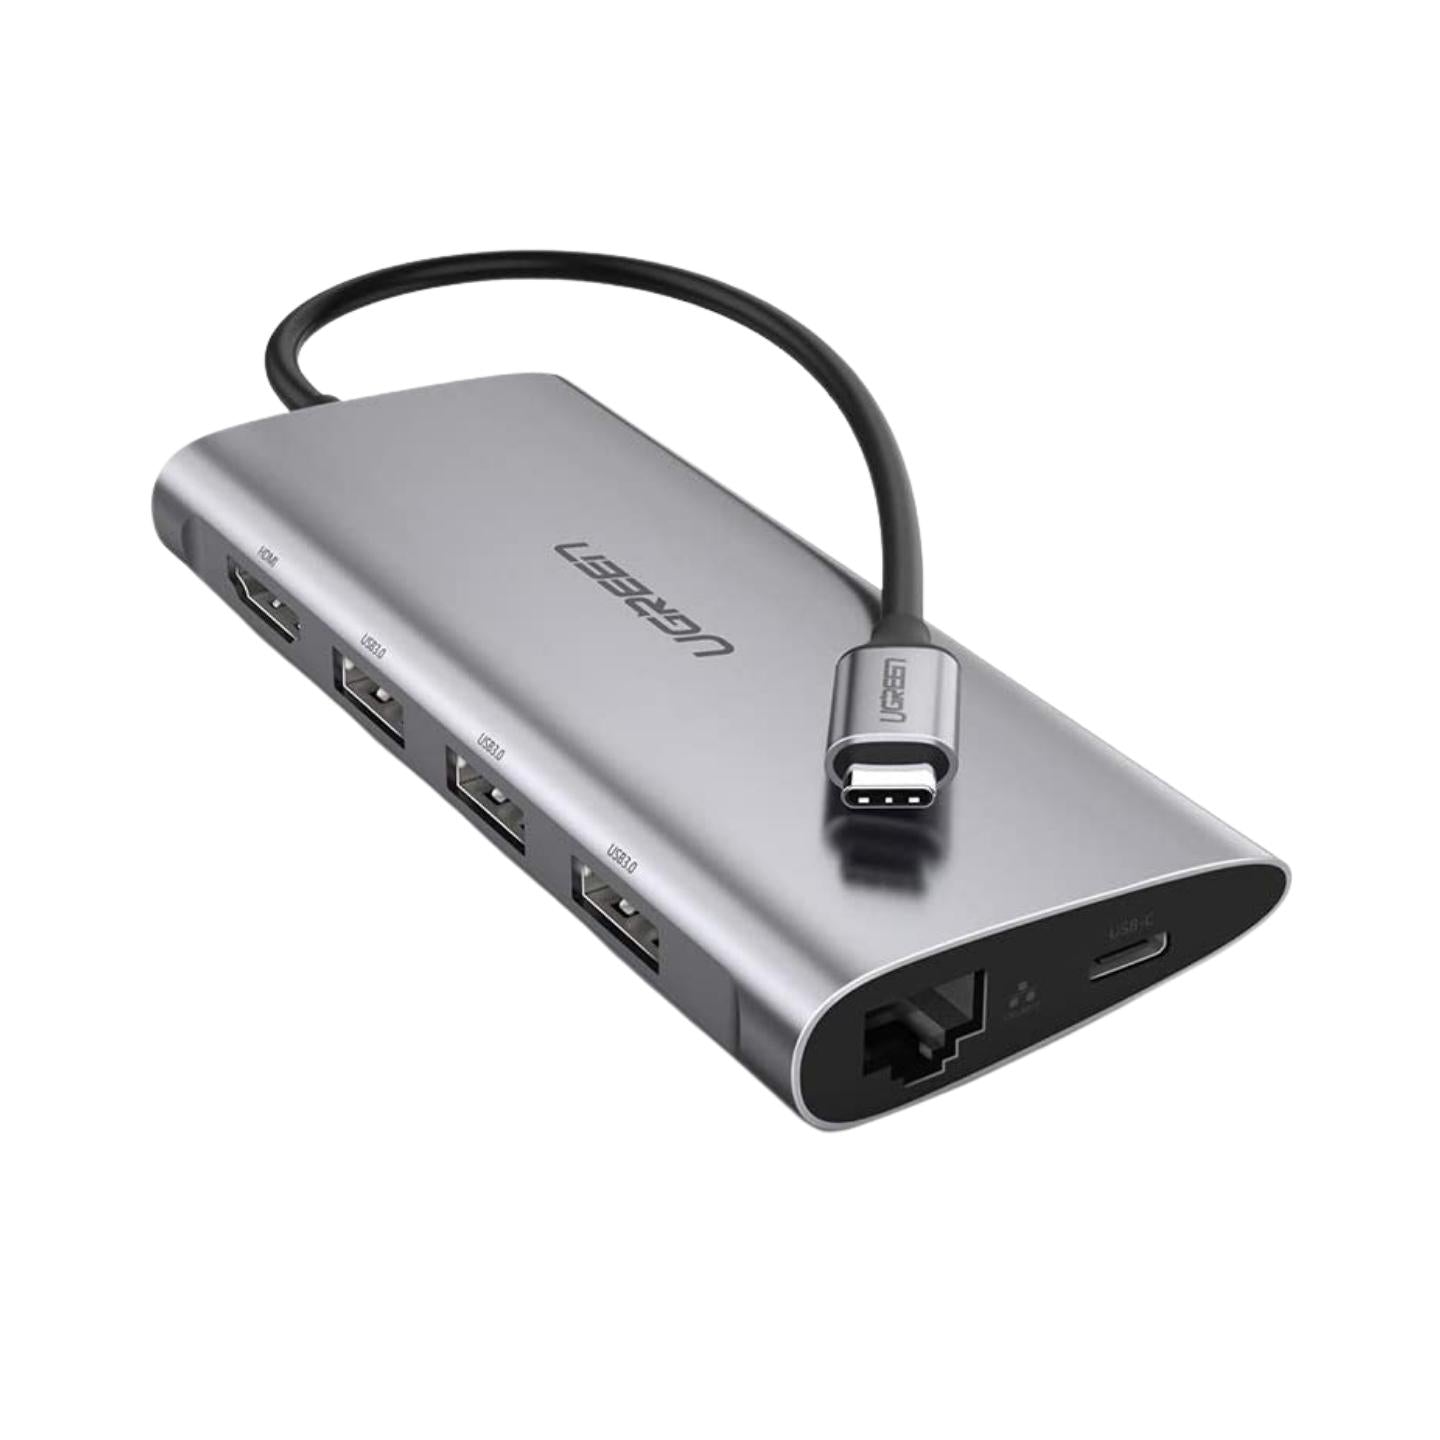 UGREEN 4K 30Hz 8-in-1 USB-C to USB 3.0, HDMI, Ethernet Lan, SD / TF Multiport Adapter Hub with 5Gbps Data Transfer Speed, Built-in Over-voltage Protection | 50538